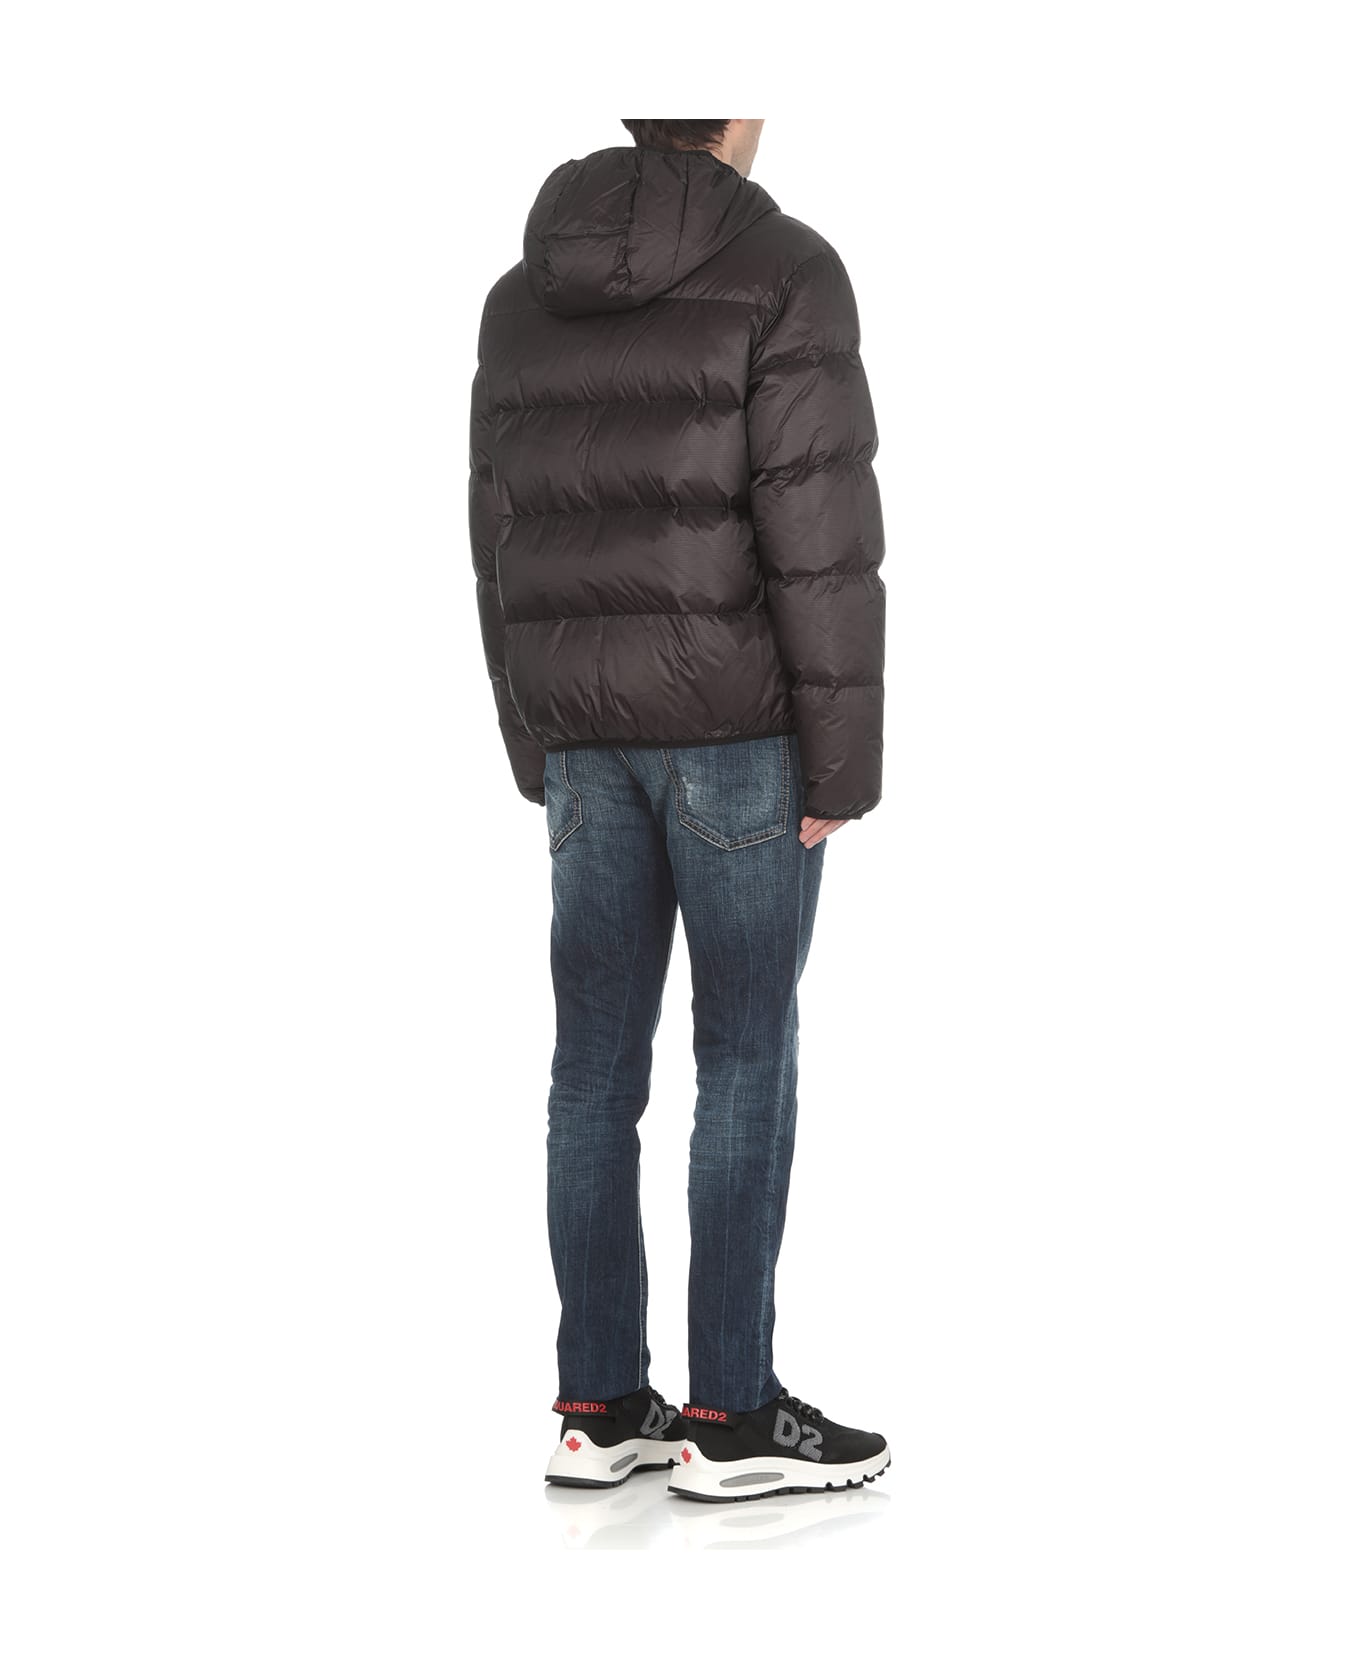 Dsquared2 Quilted Logoed Down Jacket - Black